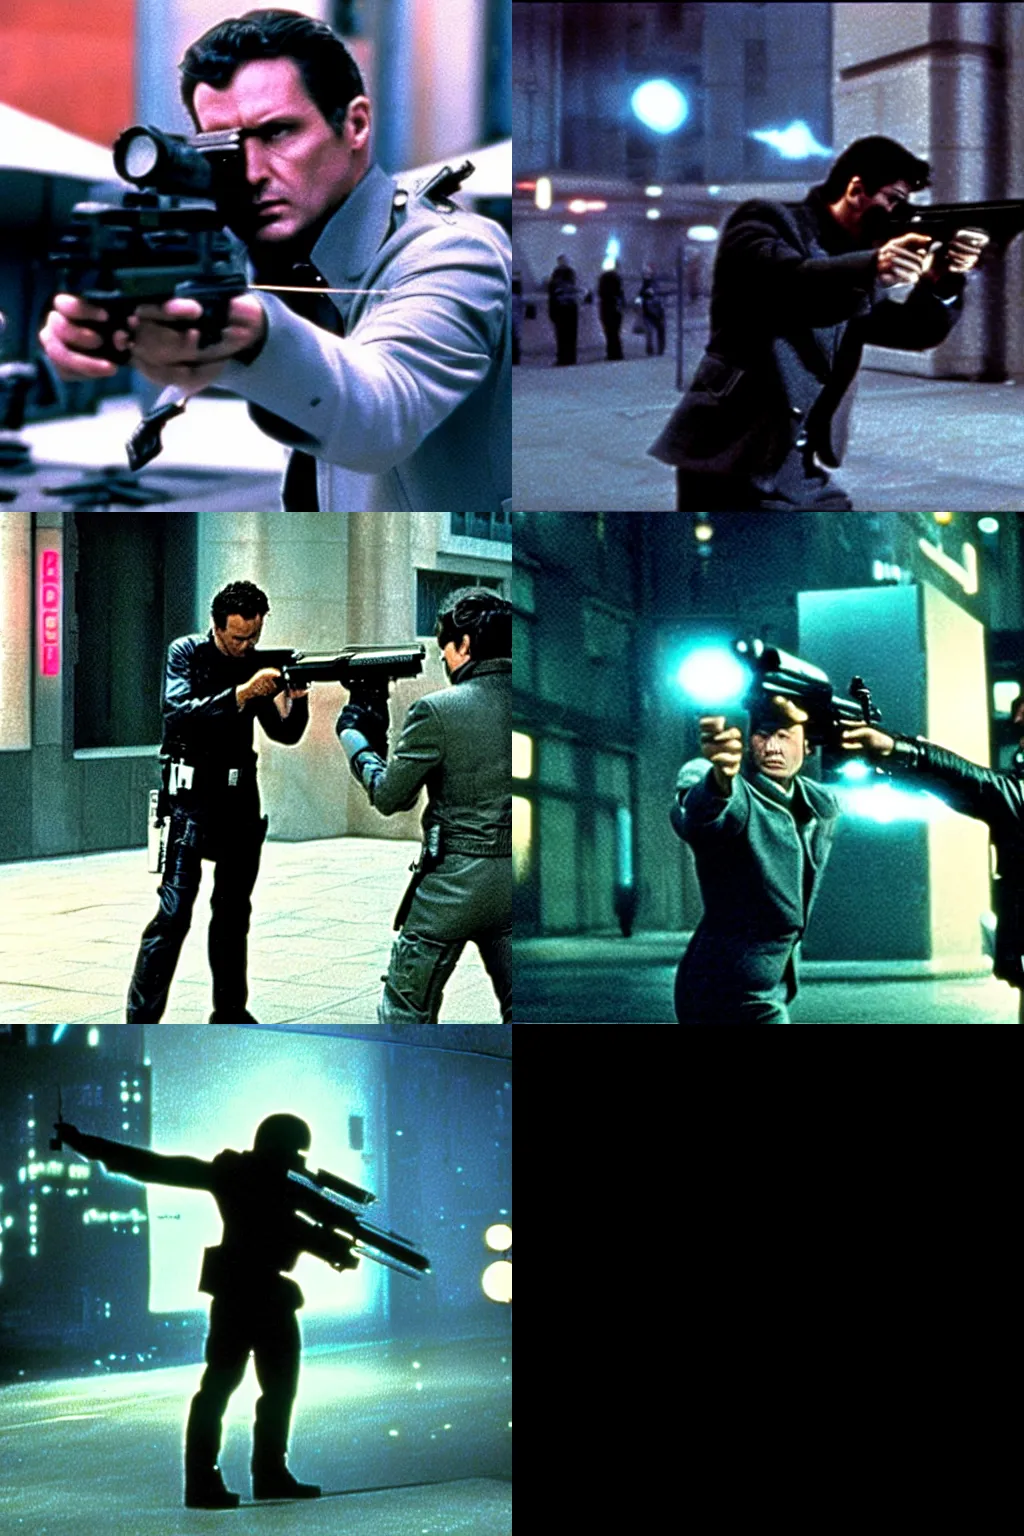 Prompt: Detective aiming gun at an android, in futuristic city, directed by Ridley Scott, neo-noir science fiction, style of Nicholas Bouvier